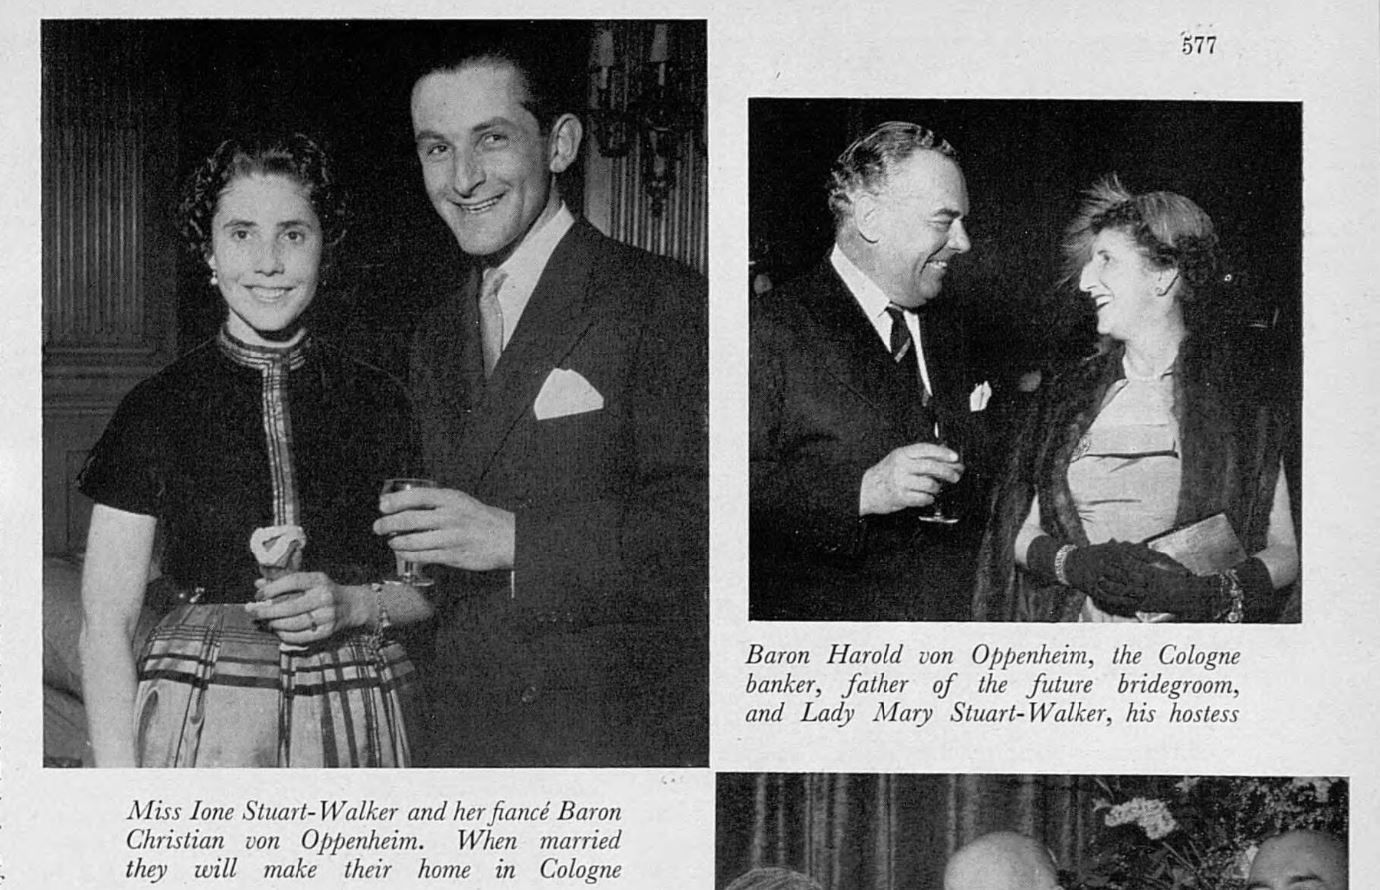 Tatler 23 March 1955 engagement of Ione